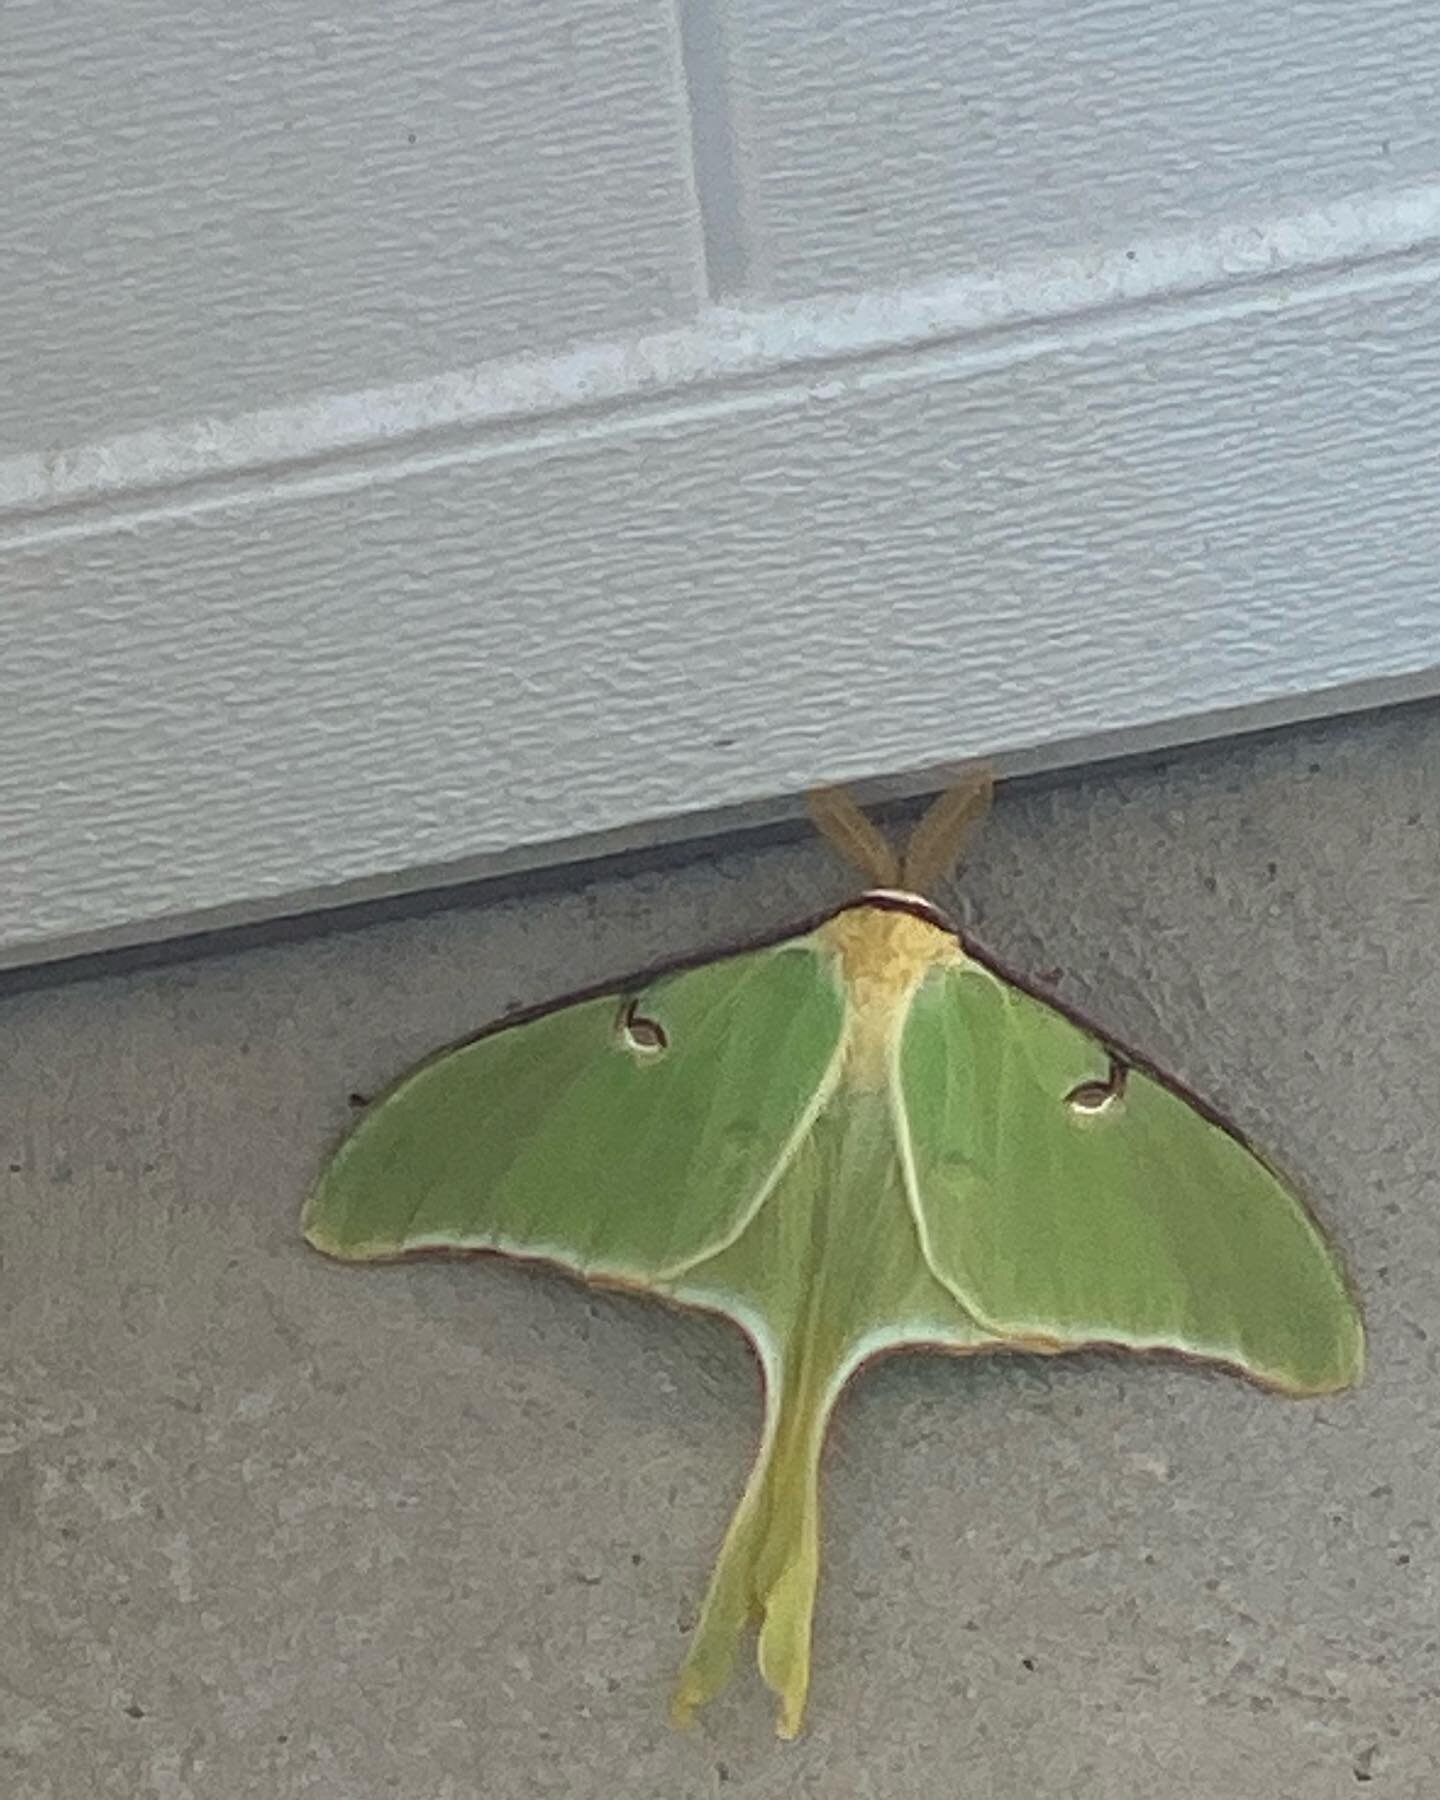 Beautiful Luna moth resting in front of my garage this morning. They are huge! Between this and the bird that 💩 on my head last week, I&rsquo;m thanking the universe for these messages. #newbeginnings #transformation #seethelight